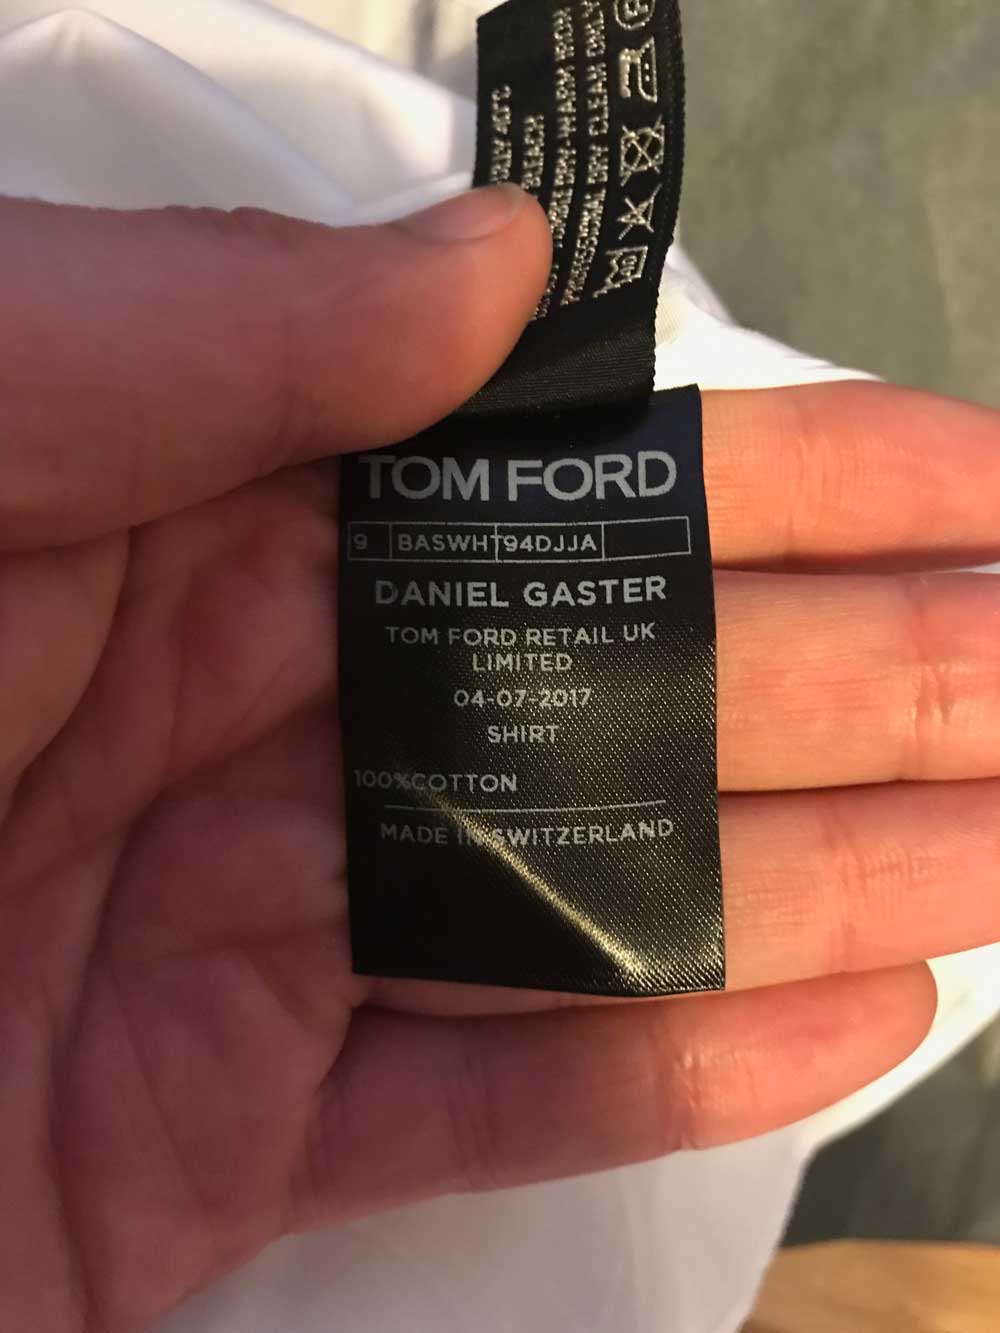 Spectre - TOM FORD Made to Measure Shirt - Review